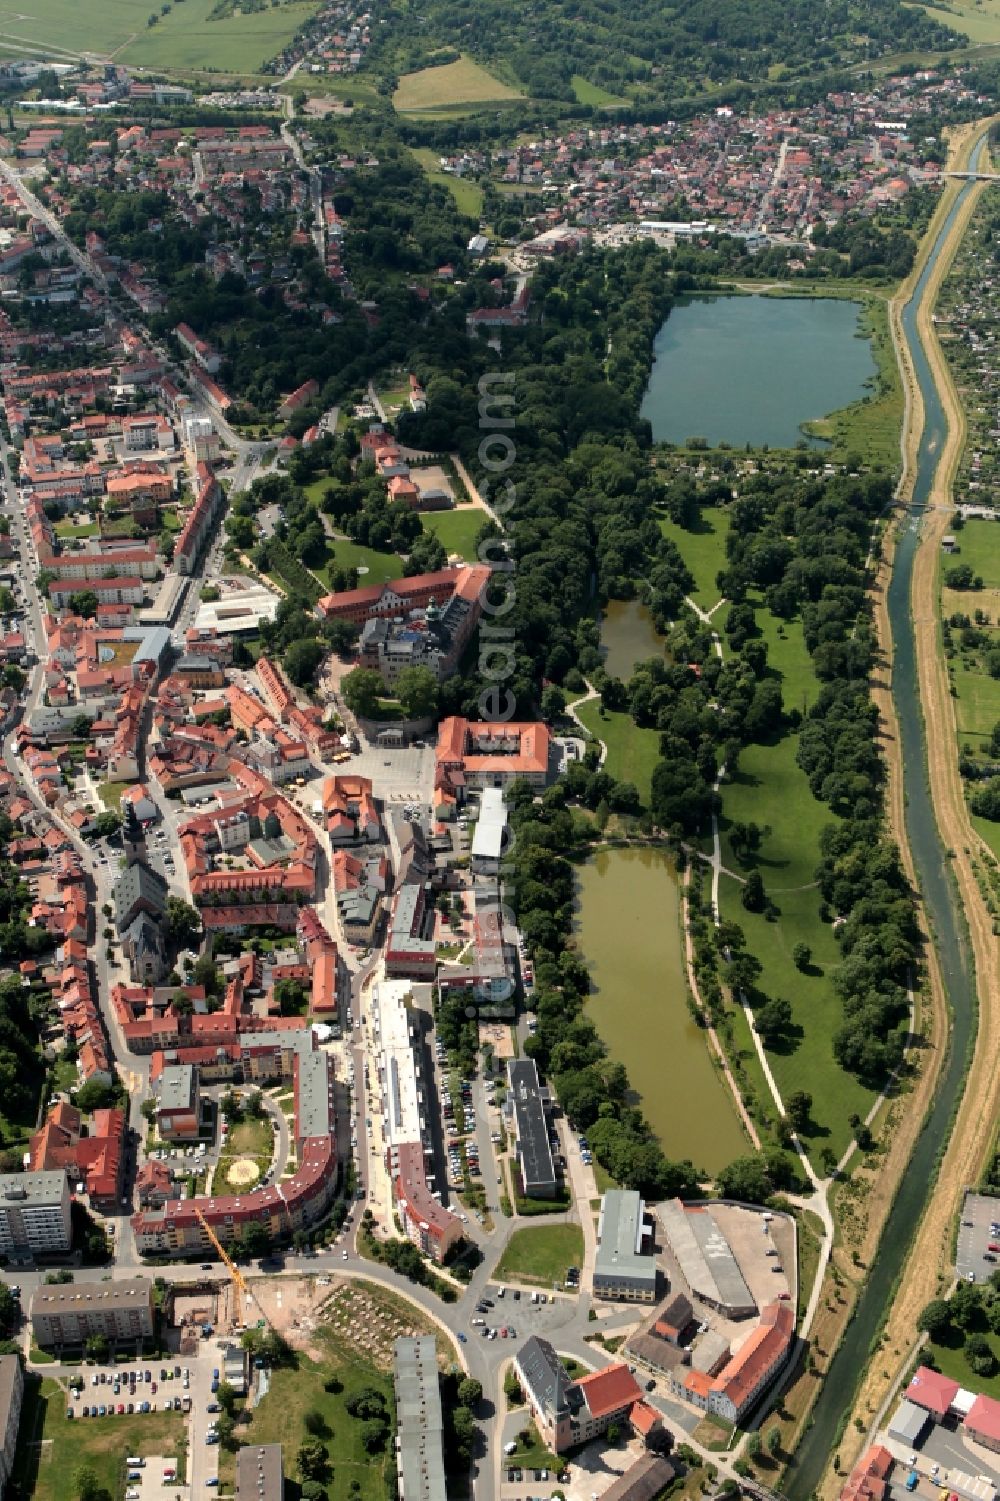 Aerial photograph Sondershausen - The Sondershausen Castle in Thuringia is at the center of the city. The sight in the neo-classical style was once the residence of the princes of Schwarzburg-Sondershausen. Today the castle is used as a palace and city museum and part of the Thuringian Foundation of Palaces and Gardens. In the former Prince House today the District Office has its seat. Octagonal house, stables and carriage house used by the State Music Academy Sondershausen. The large pond in Castle Park, a park in the style of an English landscape park, is the Haus der Kunst